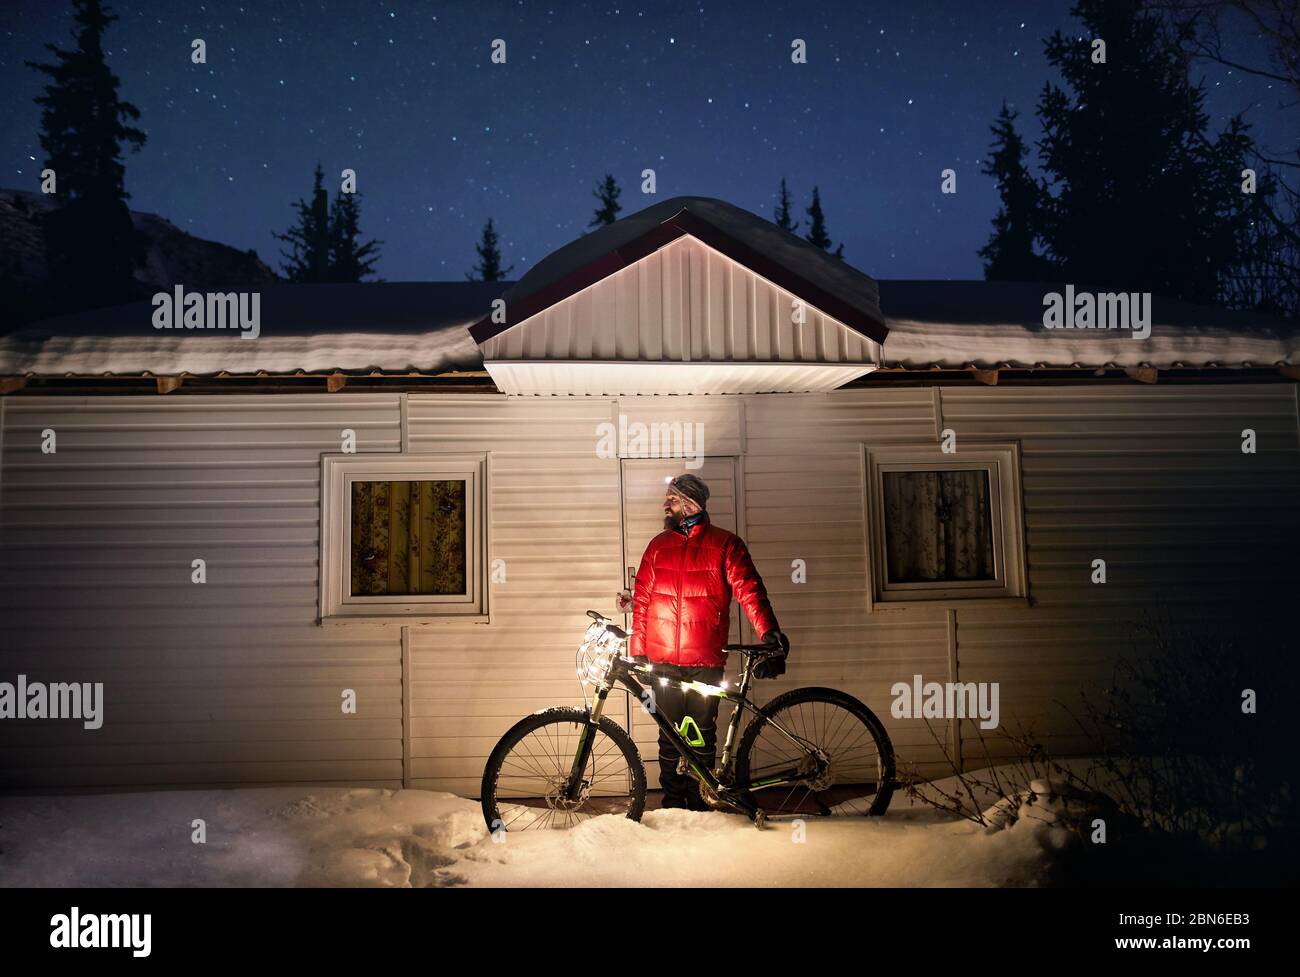 Man in red jacket with bicycle decorated with Christmas lights near small house at winter snowy forest in the mountains under night sky with stars Stock Photo